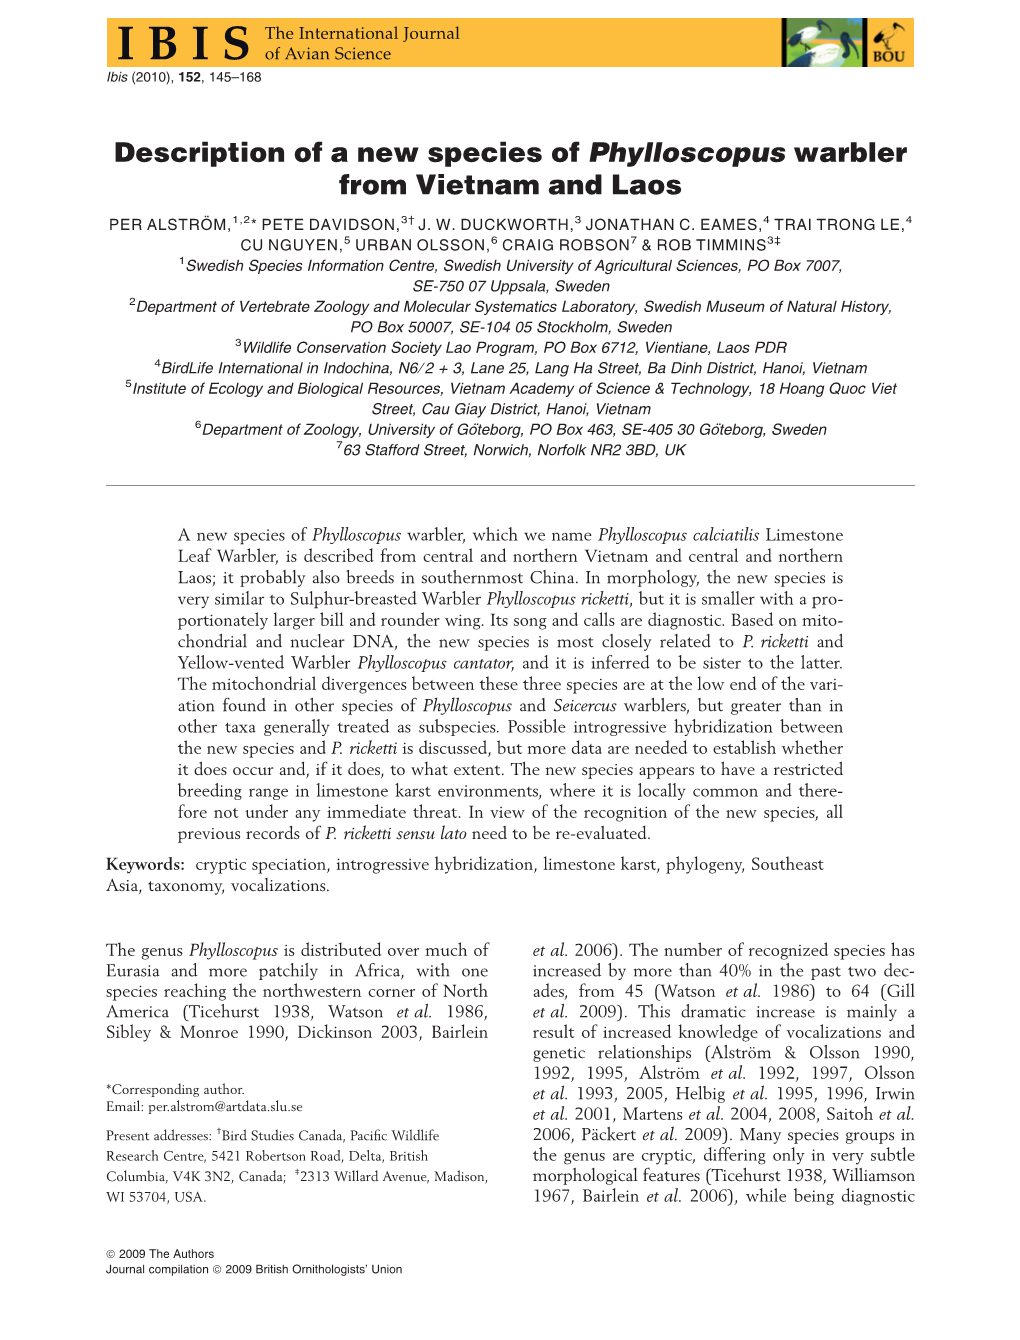 Description of a New Species of Phylloscopus Warbler from Vietnam and Laos